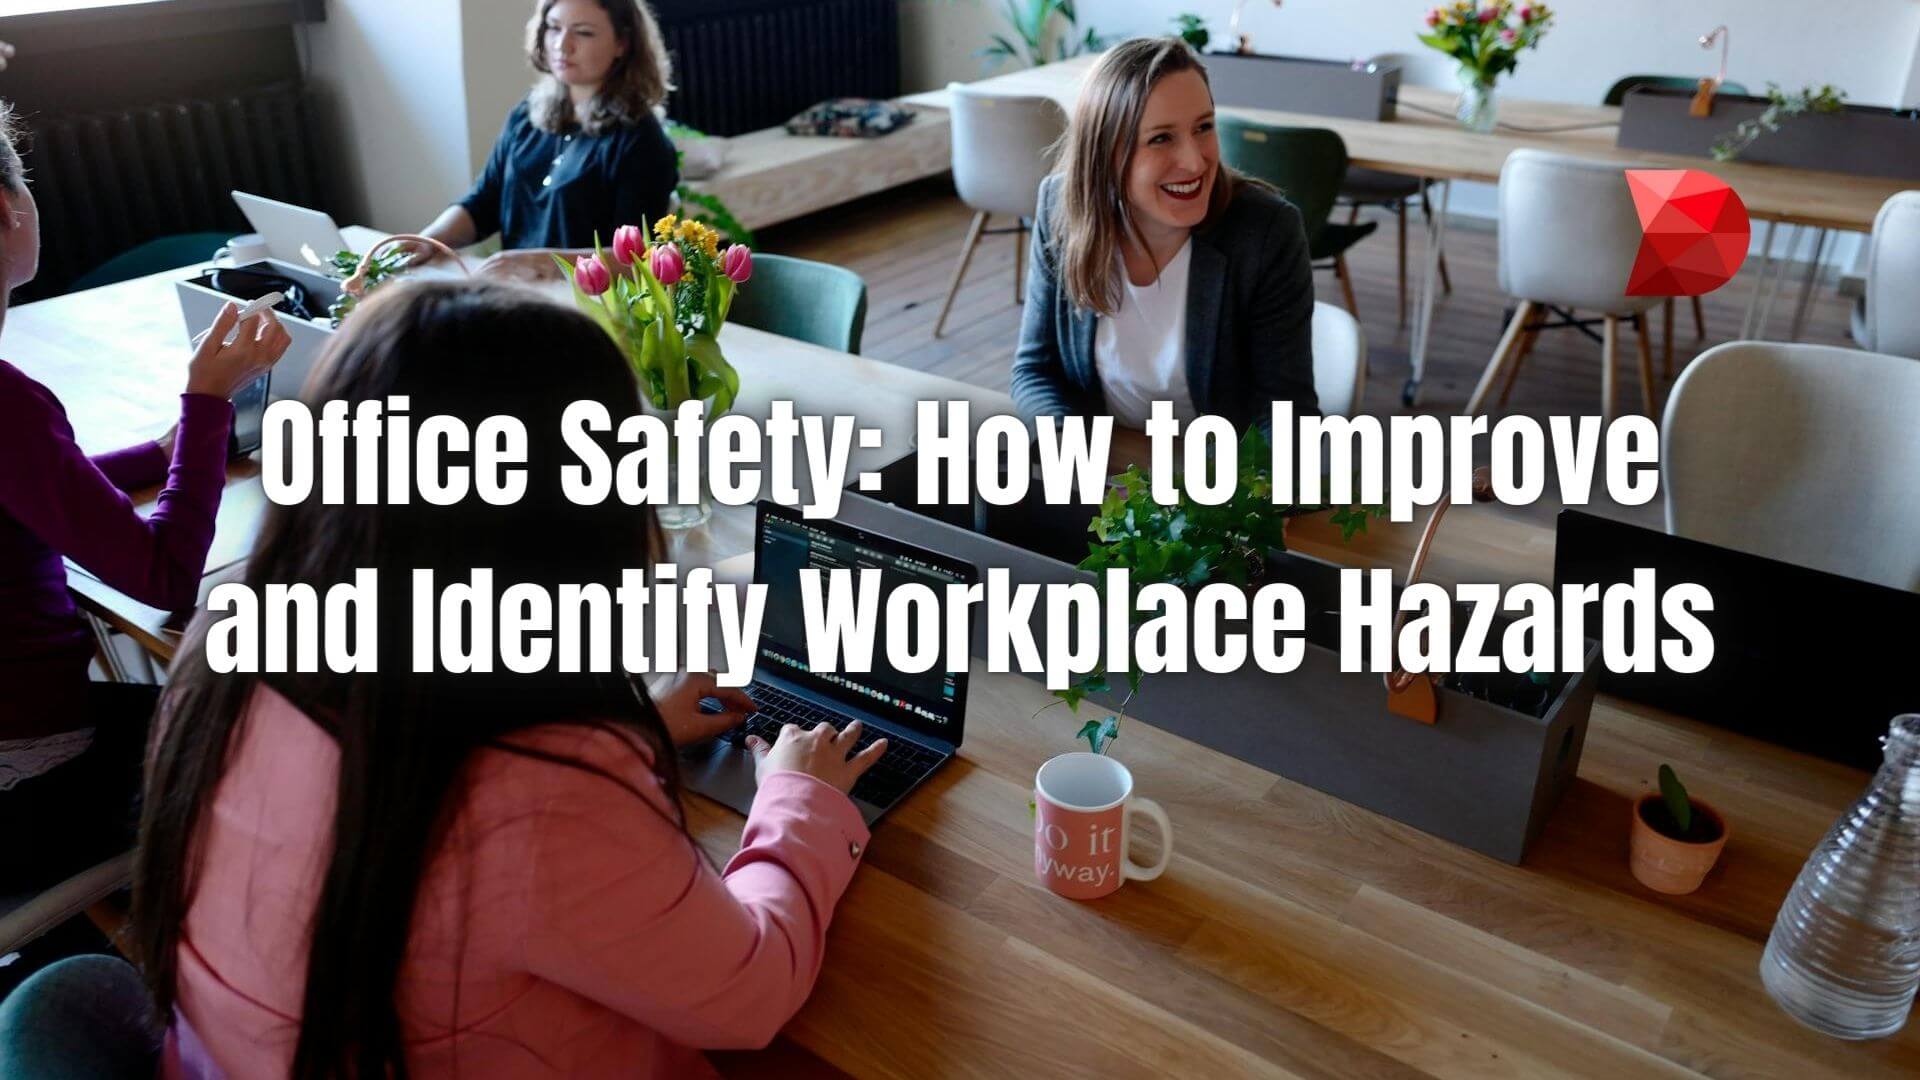 Discover essential tips to enhance office safety in our guide. Click here to learn how to spot and mitigate workplace hazards effectively.